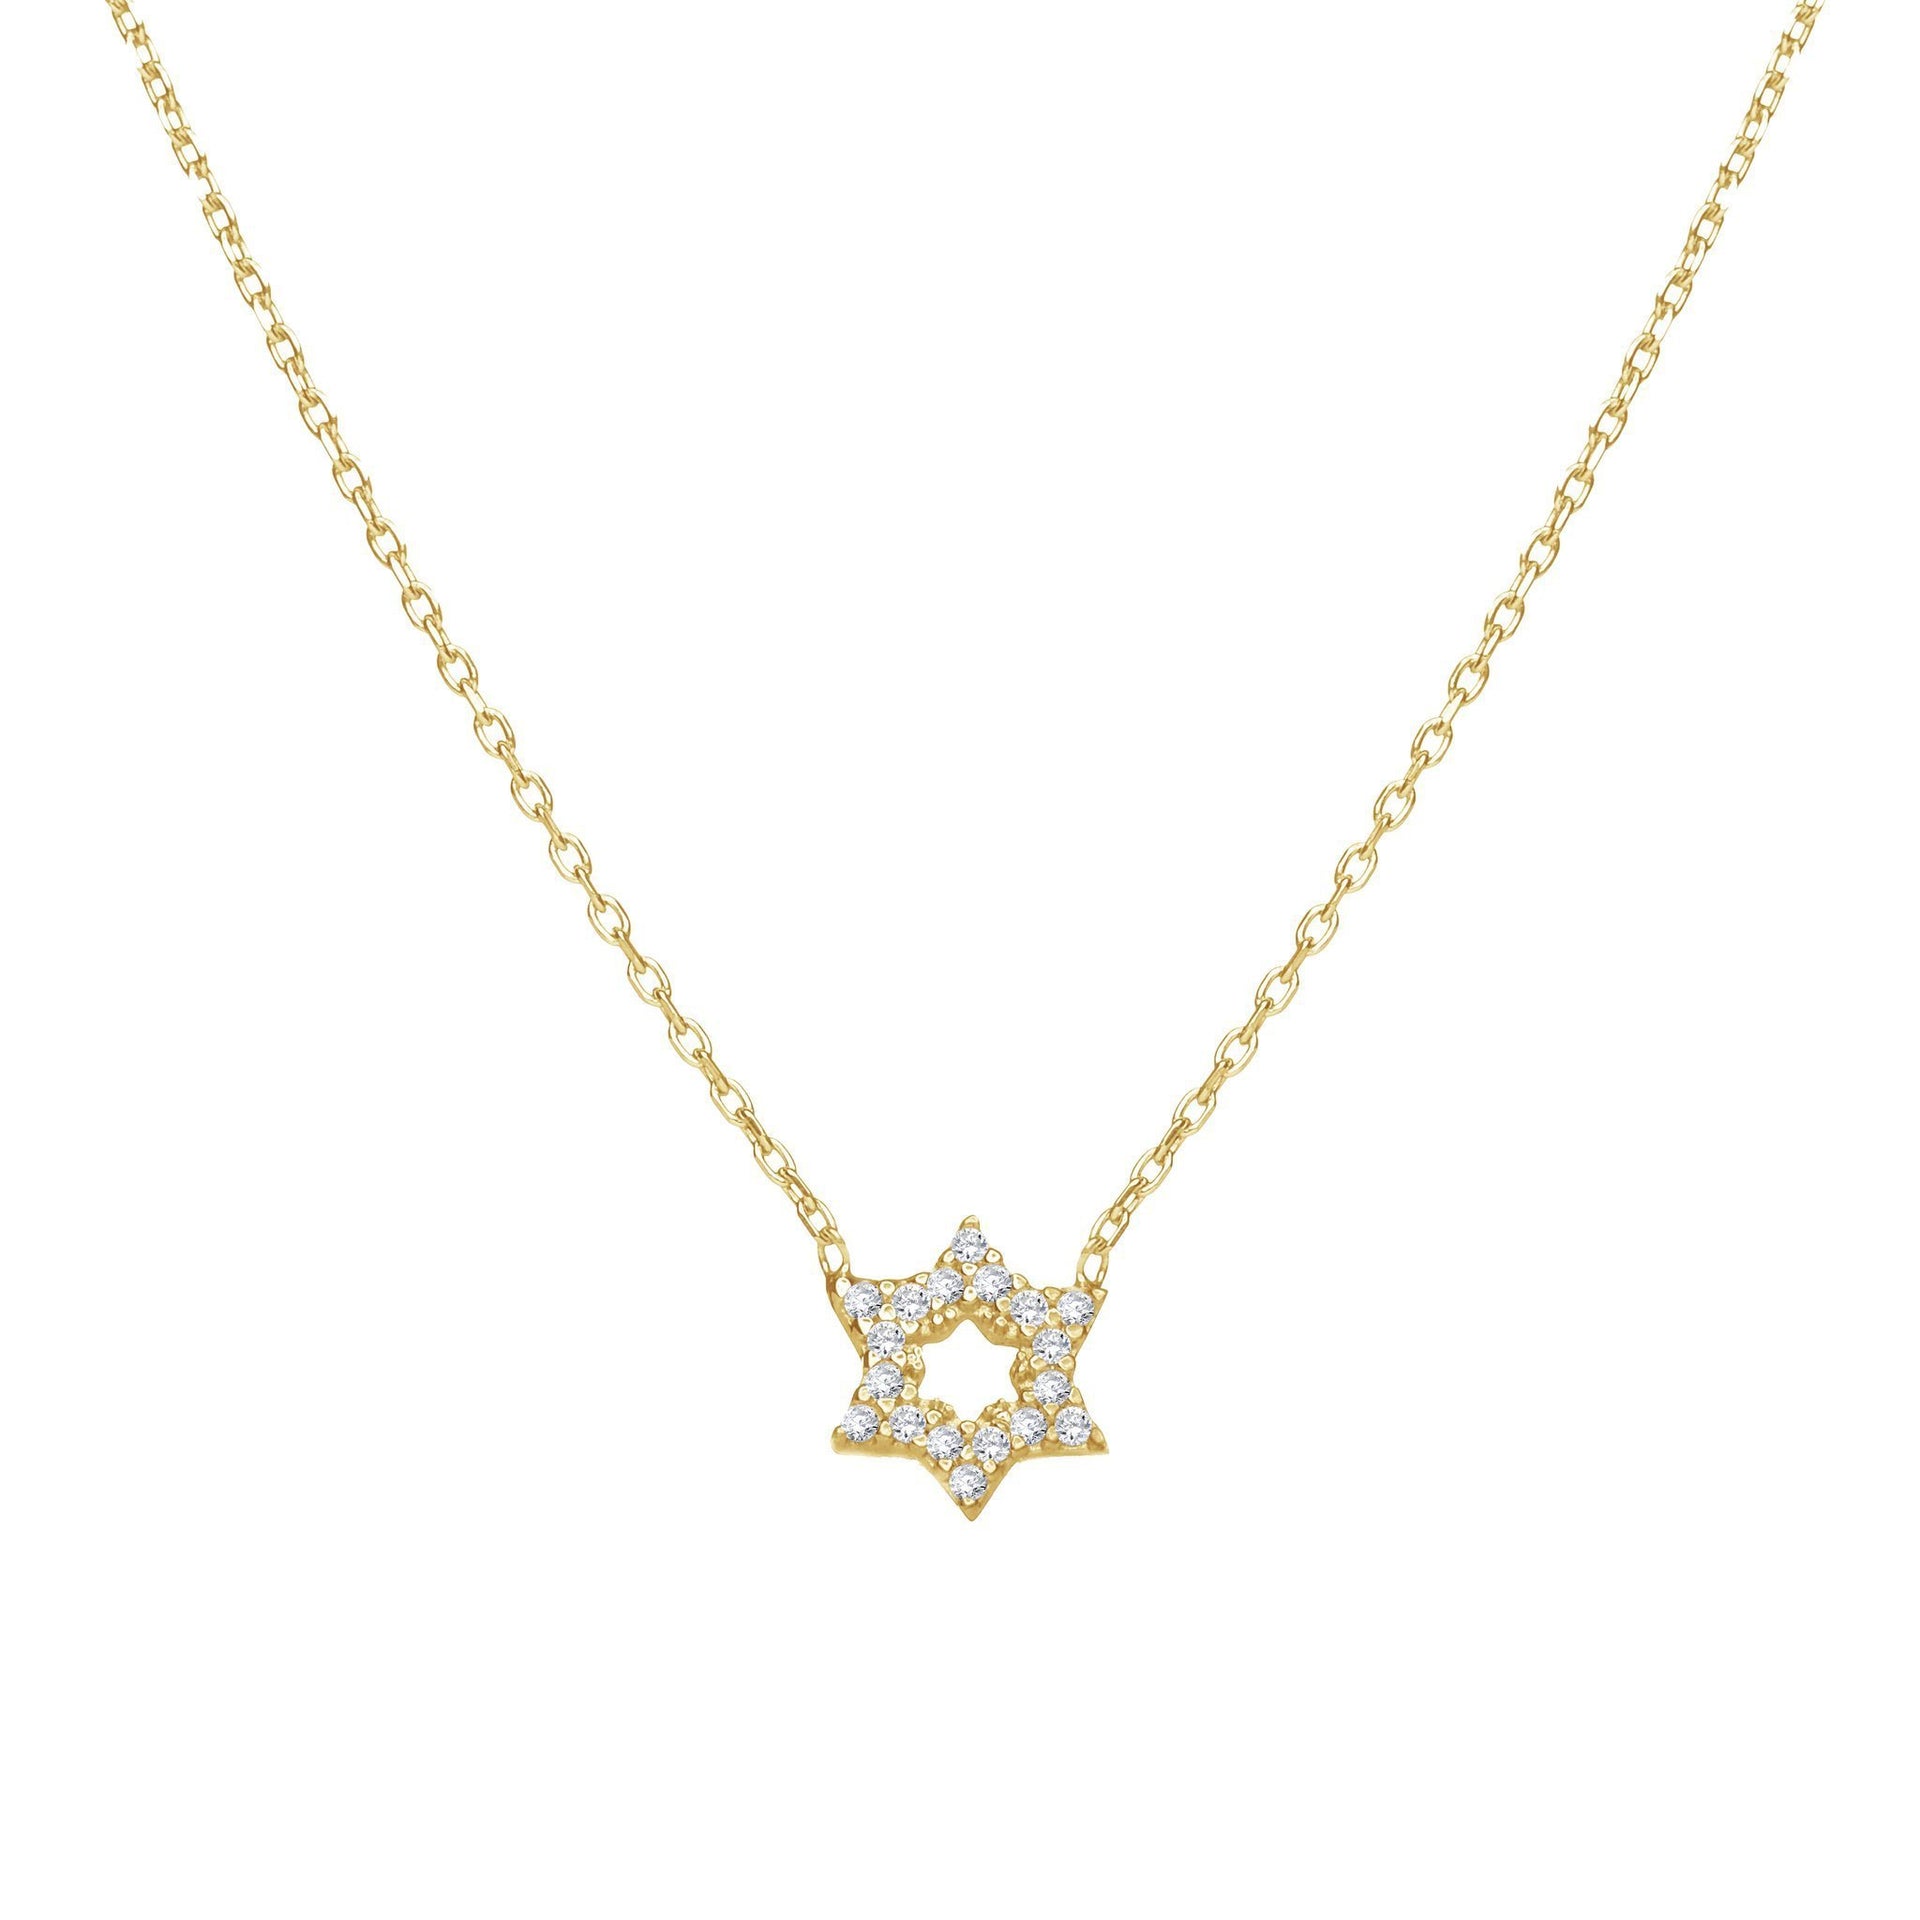 Alef Bet Necklaces Yellow Gold Star of David Sparkle Necklace - Gold, Silver or Rose Gold